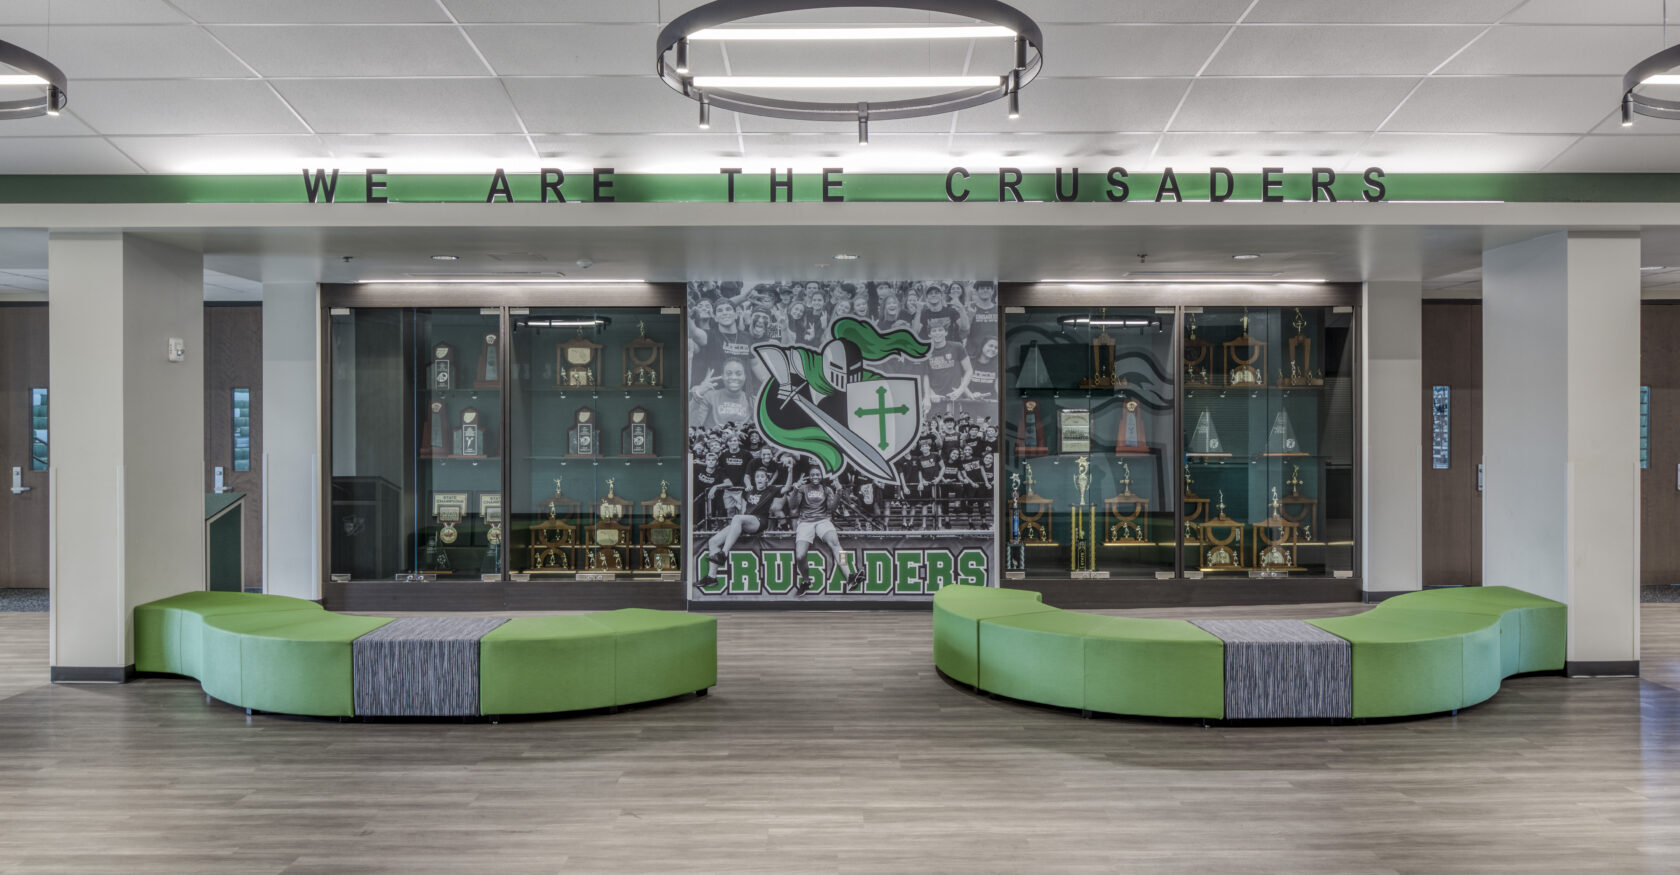 Trophy case in lobby of Tampa Catholic Athletic facility